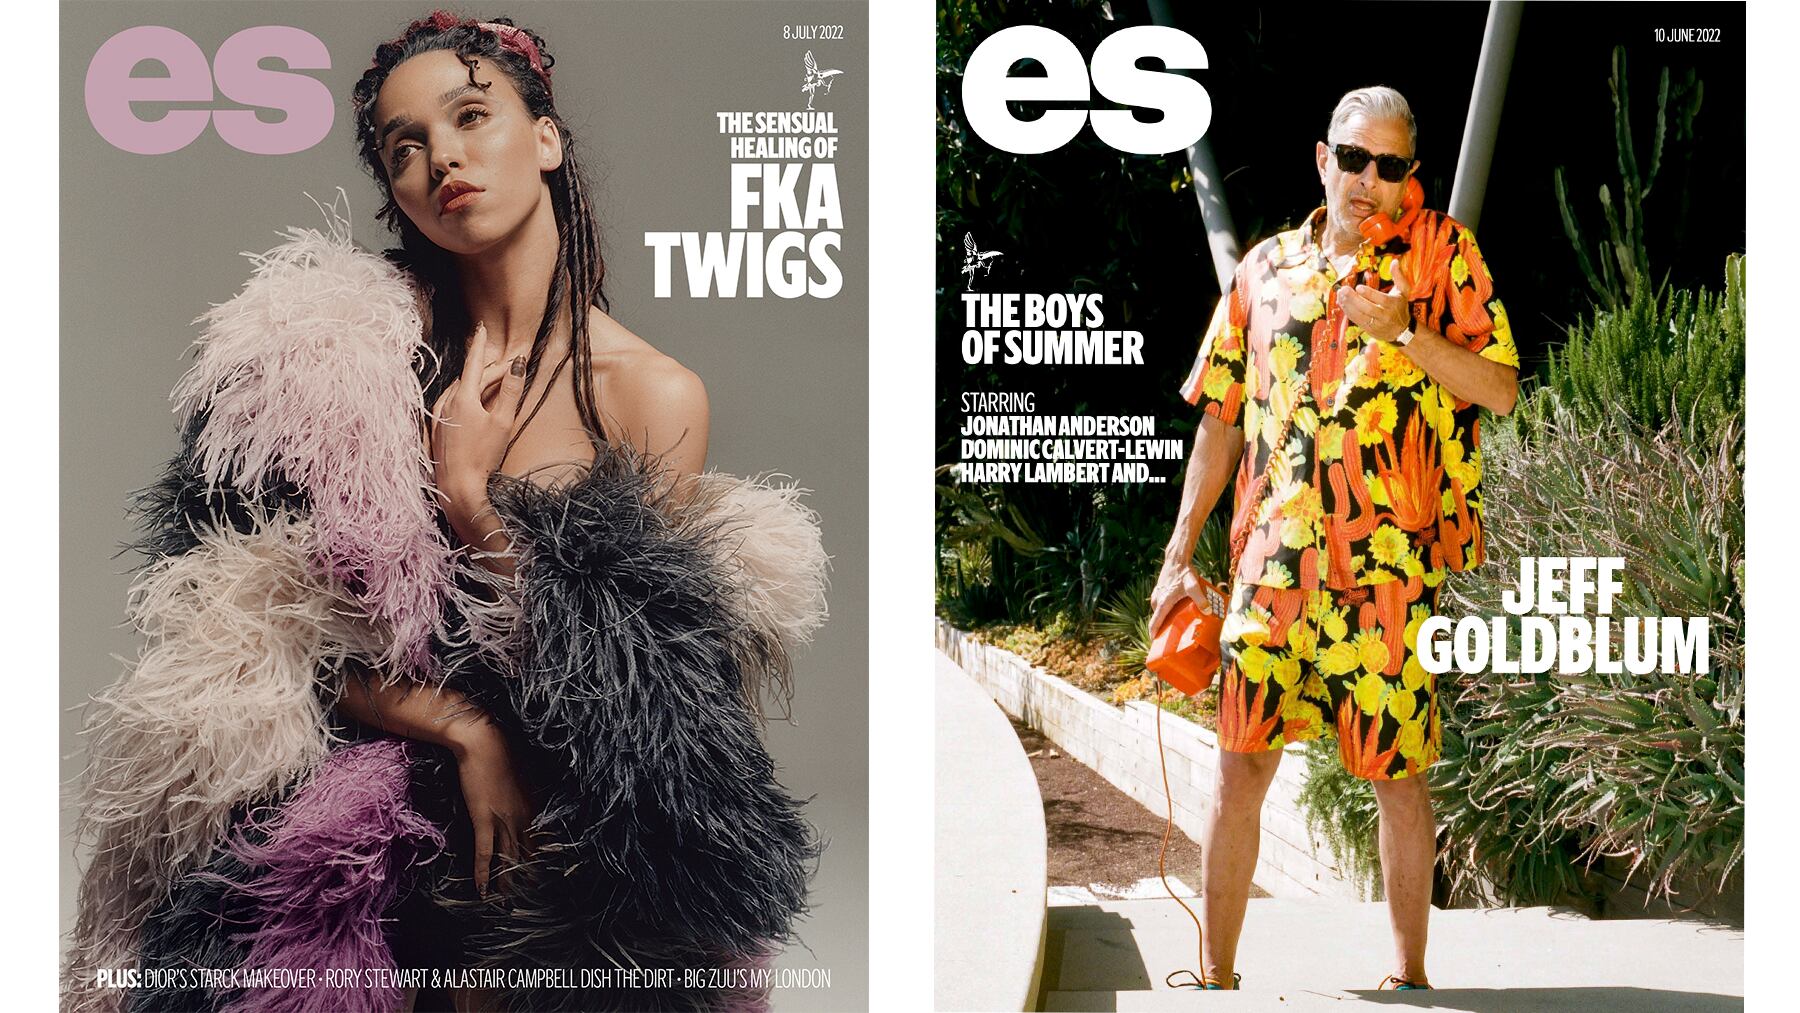 ES Magazine covers, featuring FKA Twigs (left) and Jeff Goldblum (right).